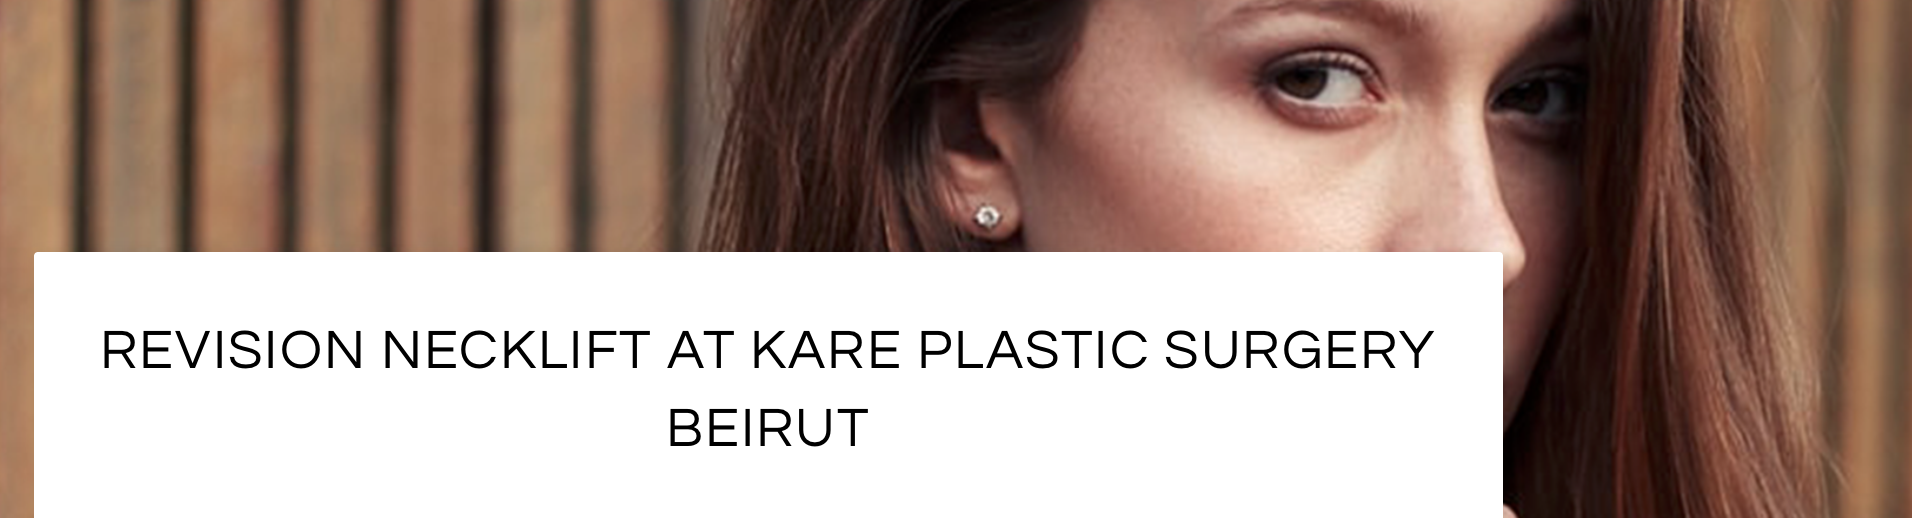 Dr. Raffy Karamanoukian at Kare Beirut performs revision neck lift surgery in Lebanon. Dhour Choueir plastic surgery